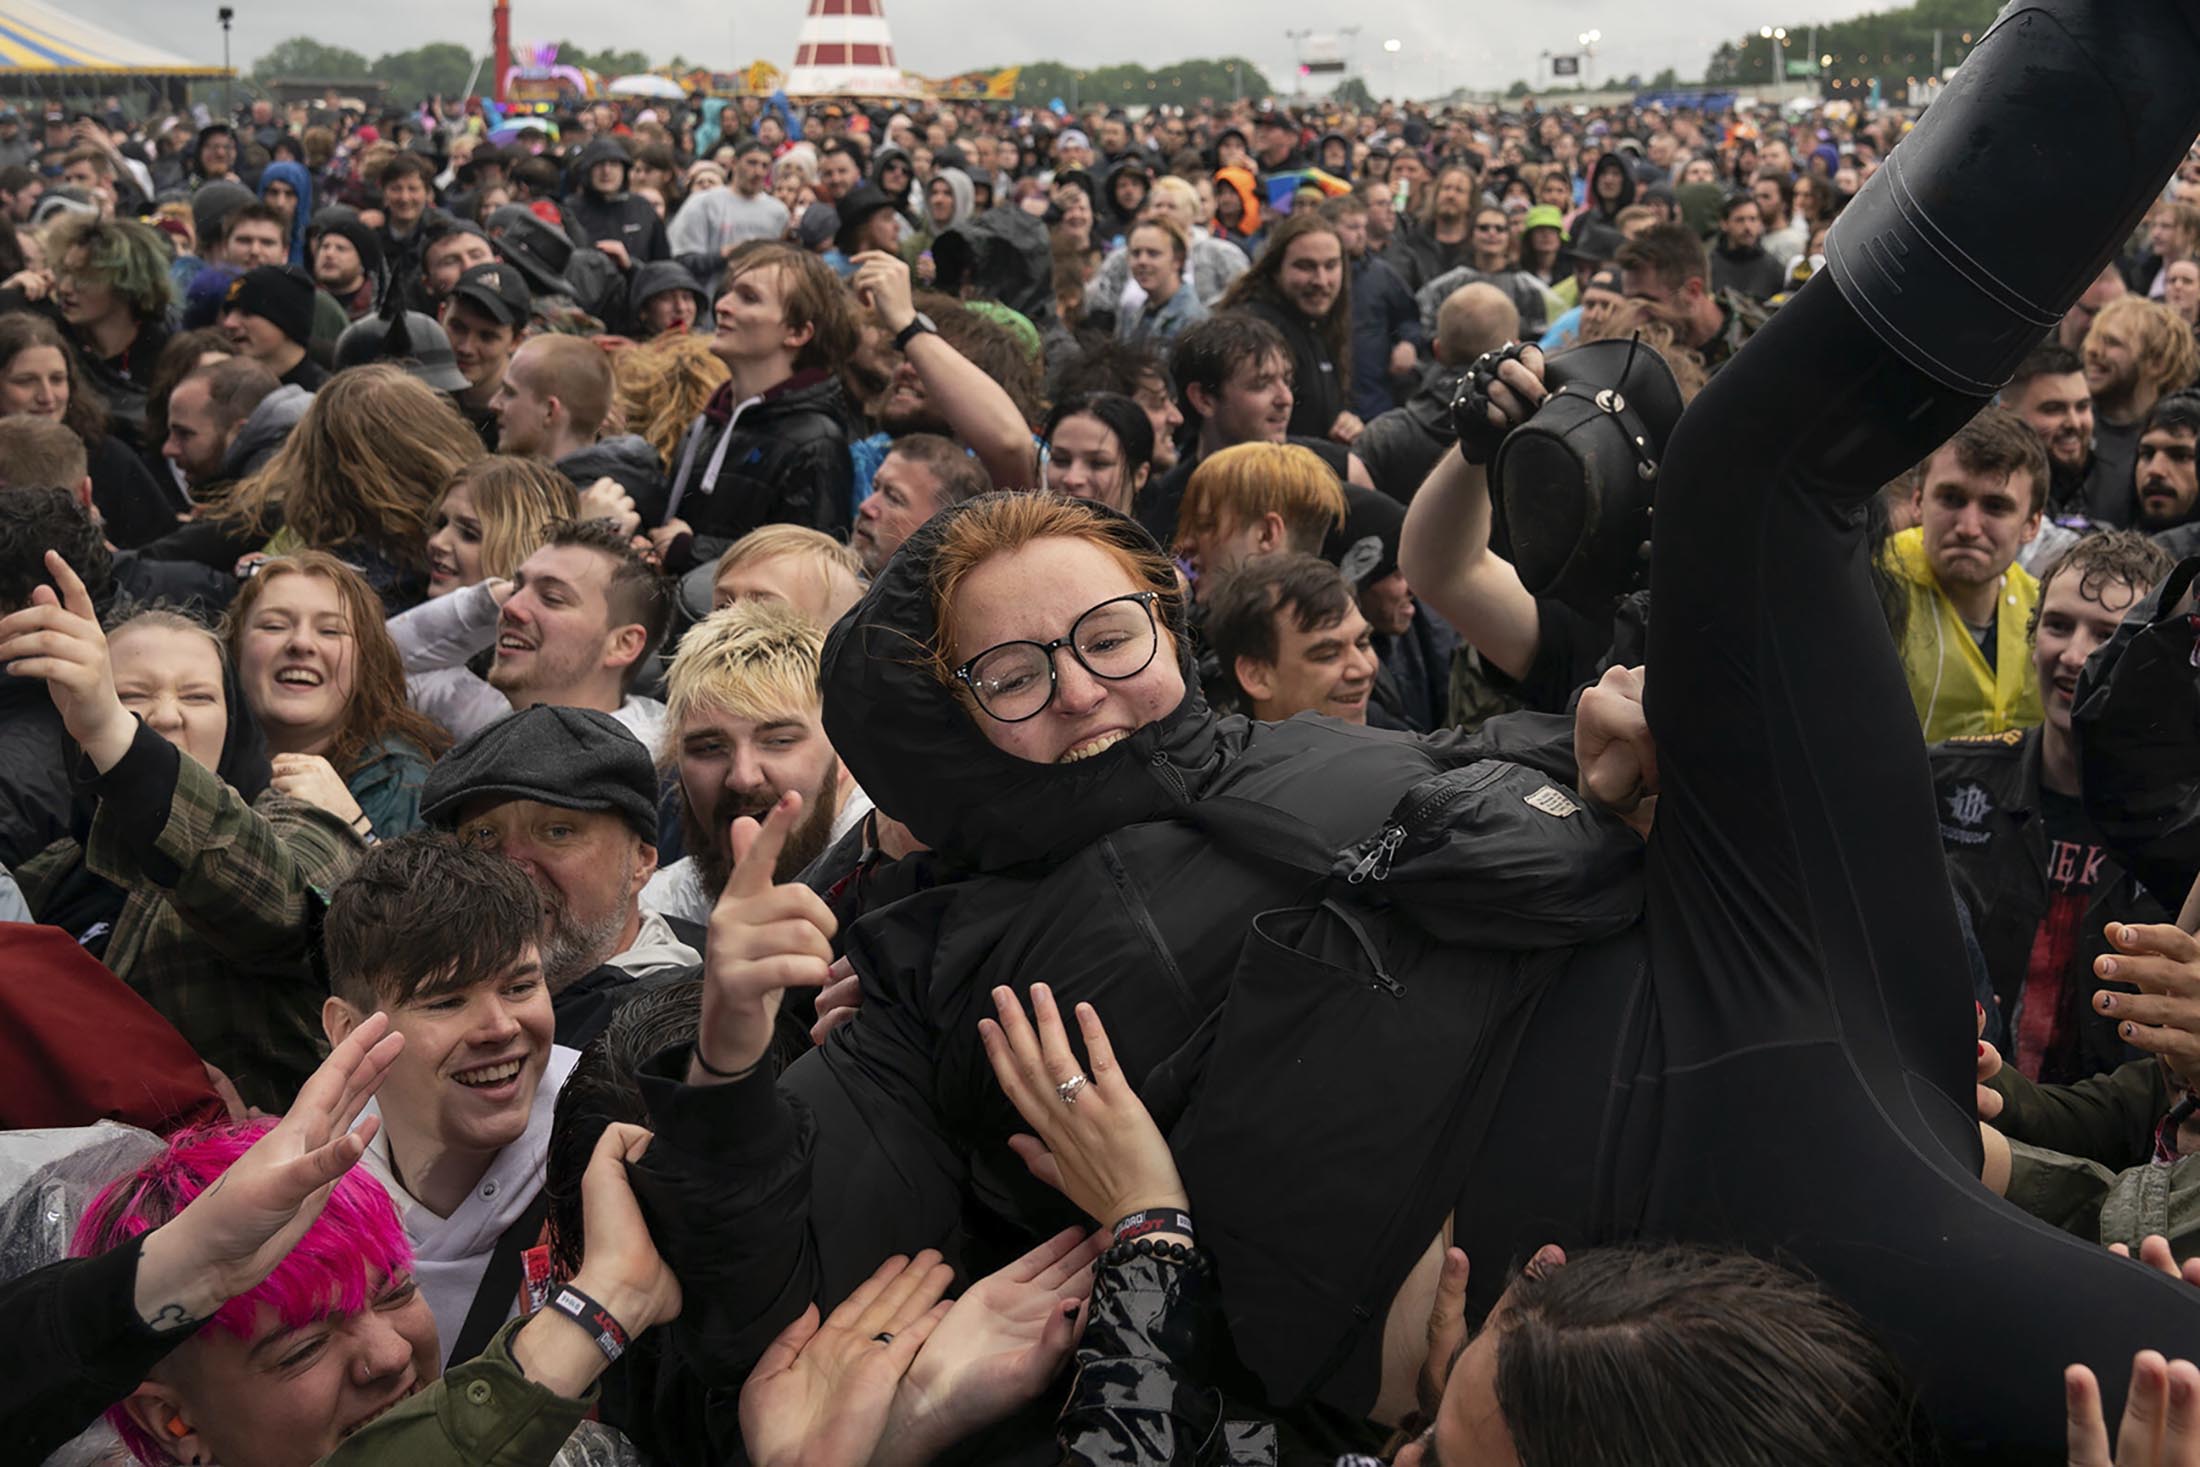 An attendee&nbsp;crowd surfs on the first day of Download Festival on June 18.